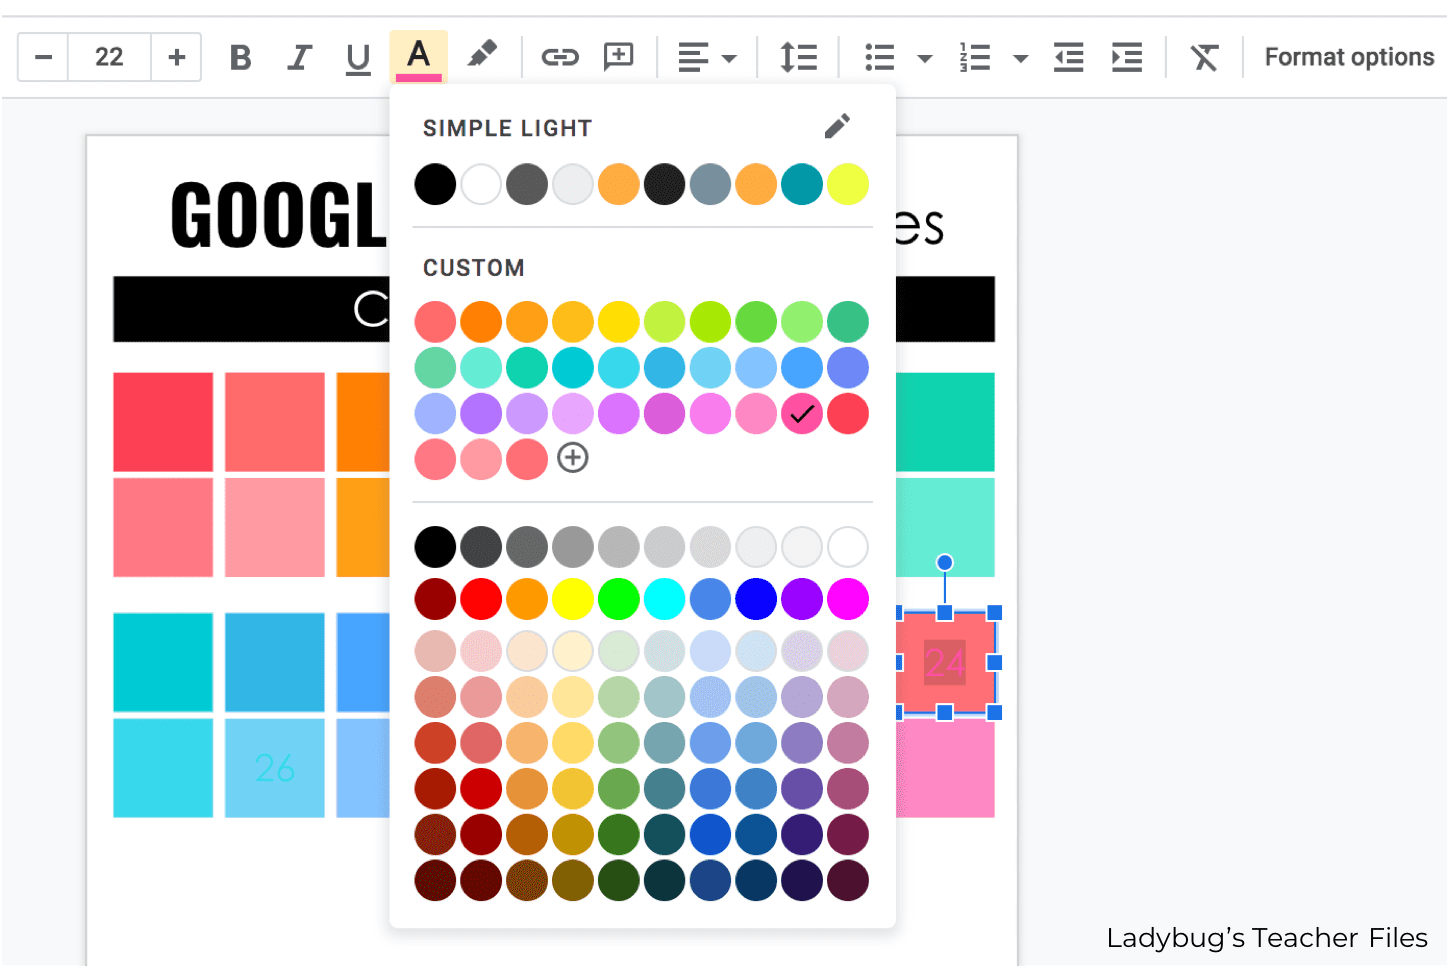 select the same custom color for the text